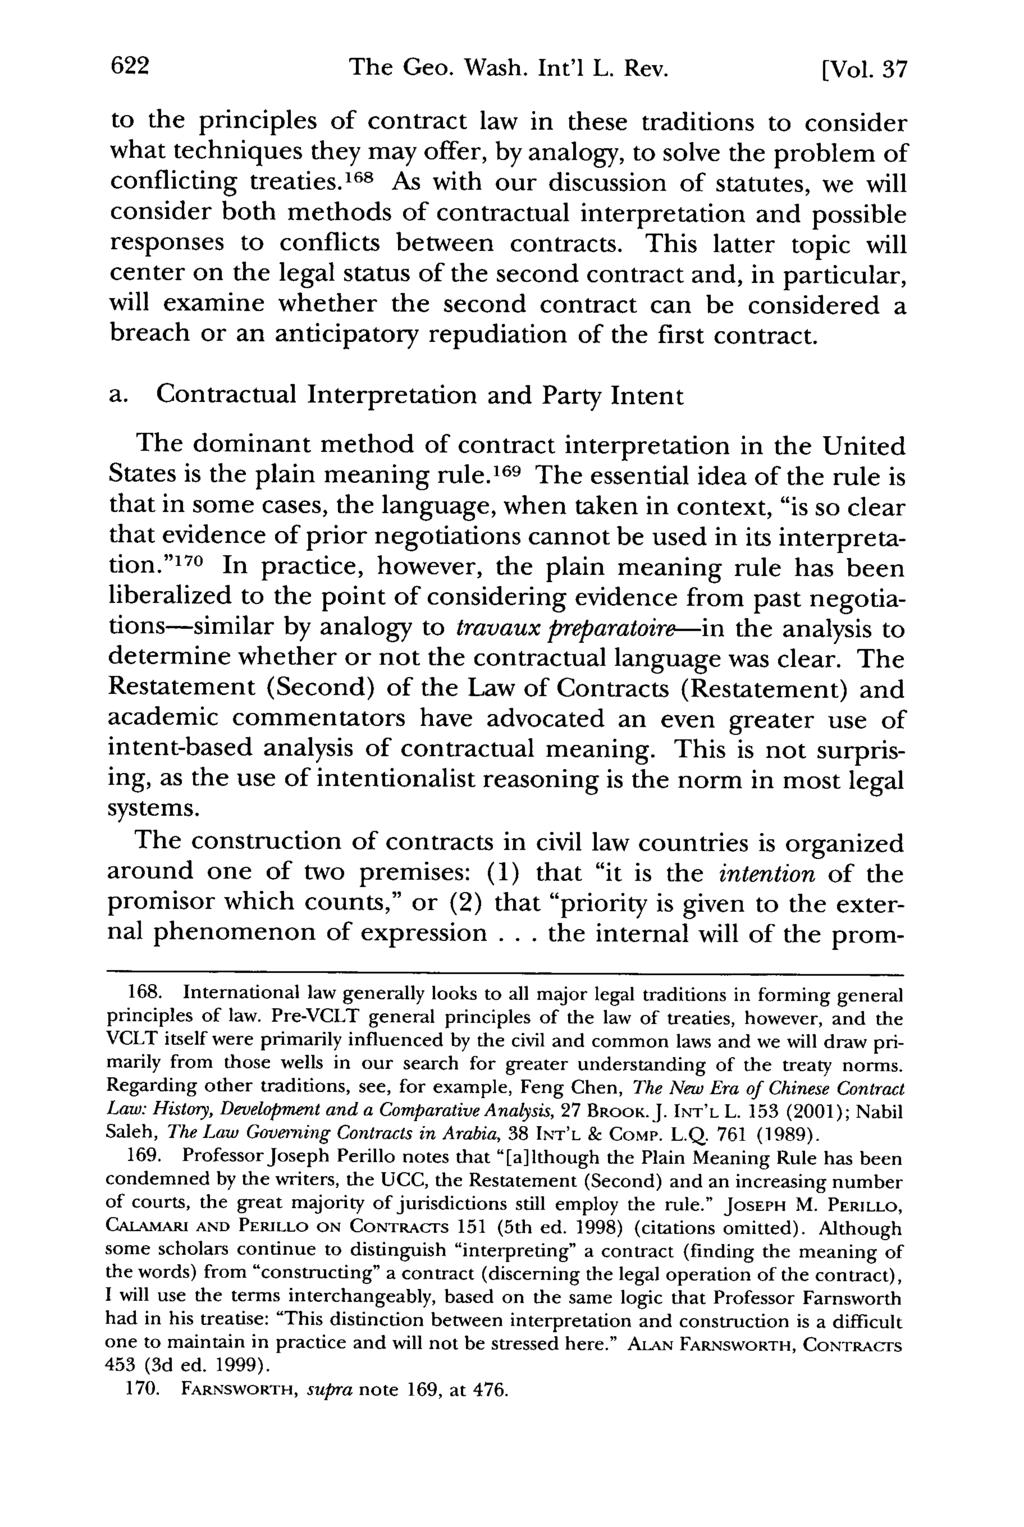 The Geo. Wash. Int'l L. Rev. [Vol. 37 to the principles of contract law in these traditions to consider what techniques they may offer, by analogy, to solve the problem of conflicting treaties.